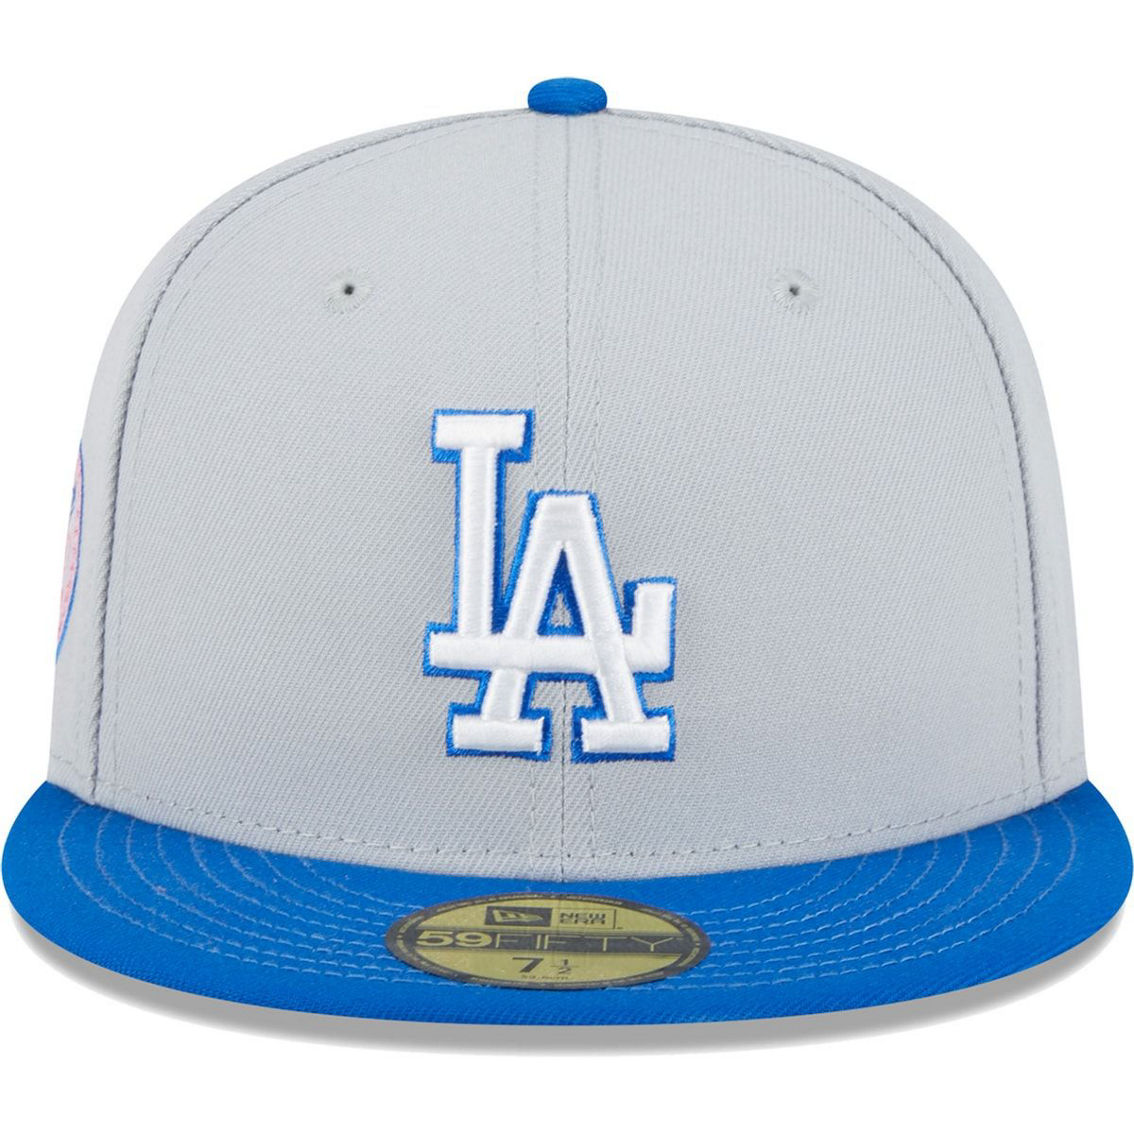 New Era Men's Gray/Blue Los Angeles Dodgers Dolphin 59FIFTY Fitted Hat - Image 3 of 4